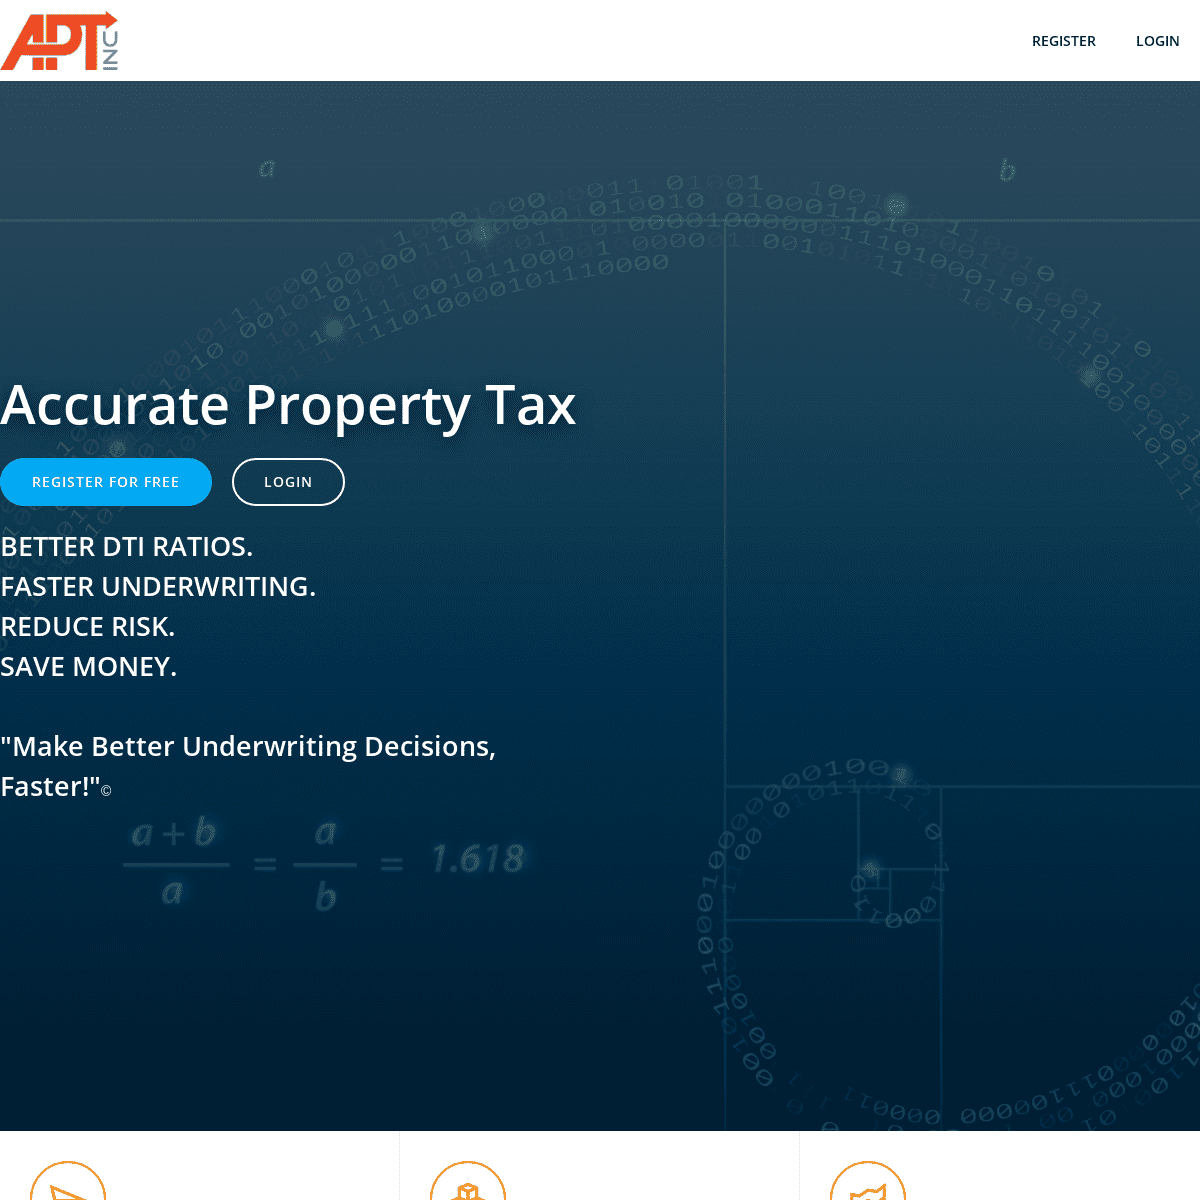 A complete backup of https://accuratepropertytax.com